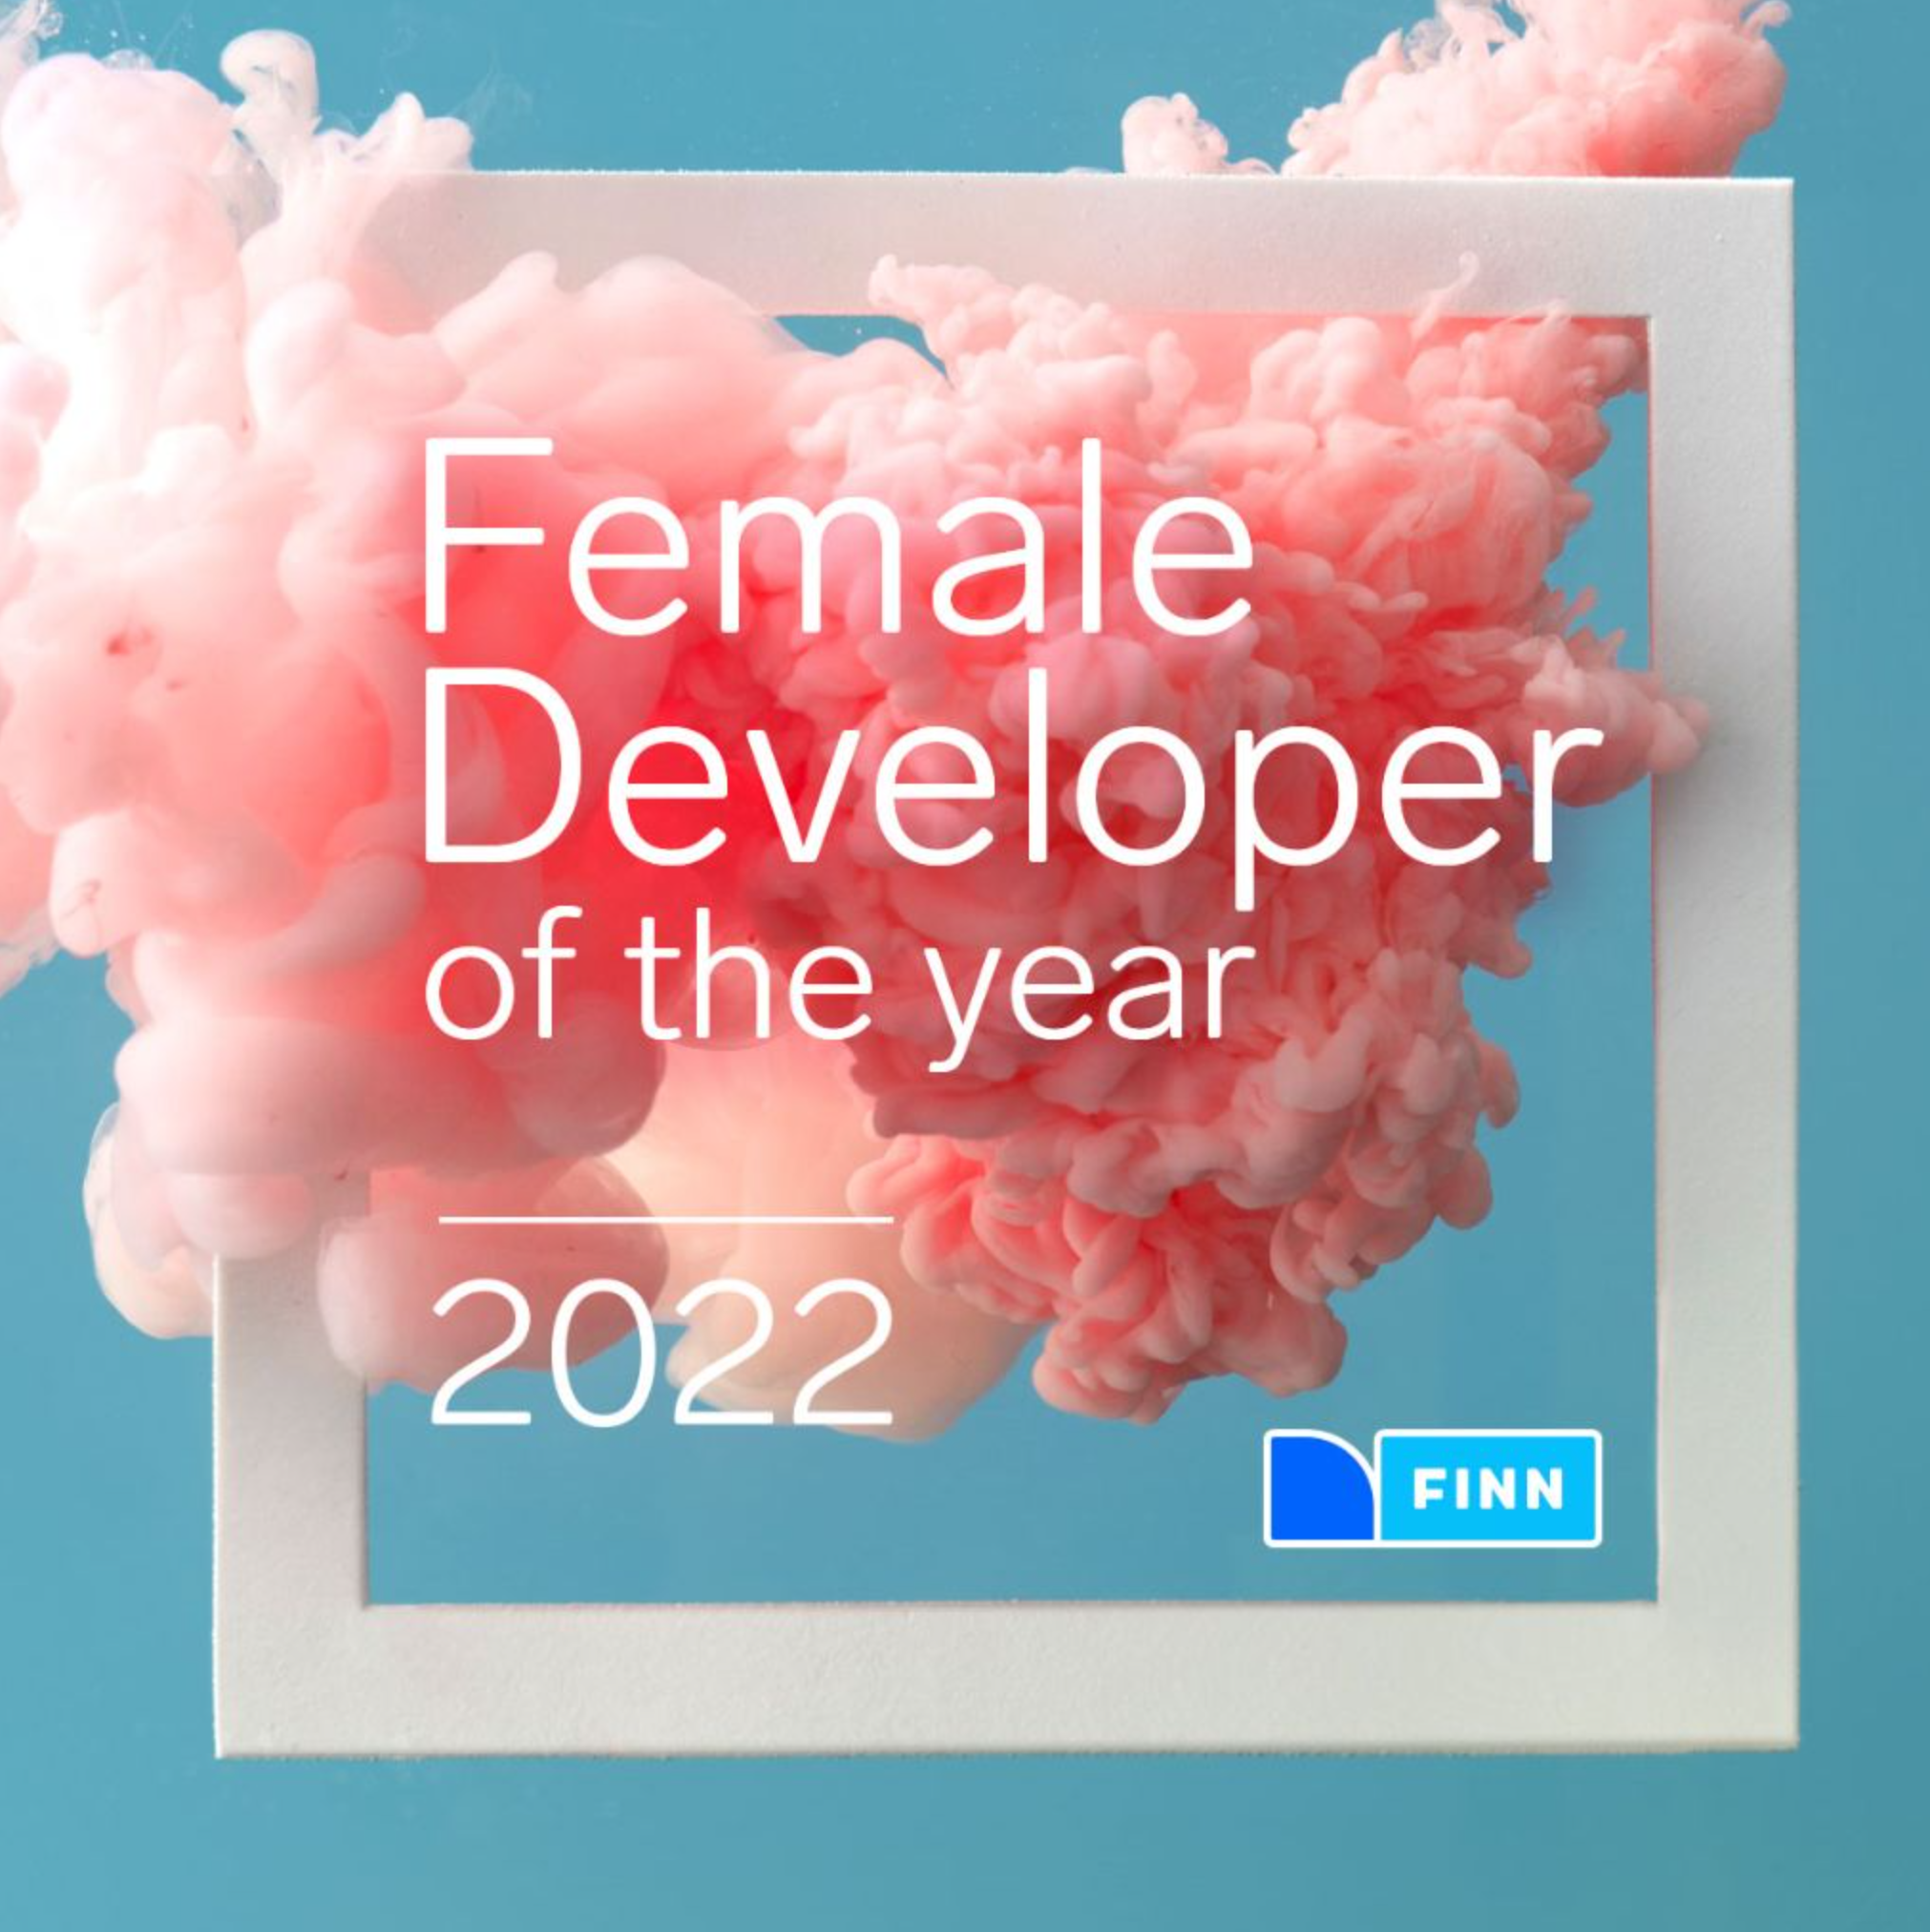 Logo of the Female Developer of the Year award by FINN.no with the year 2022, because there was no logo for the year 2021.